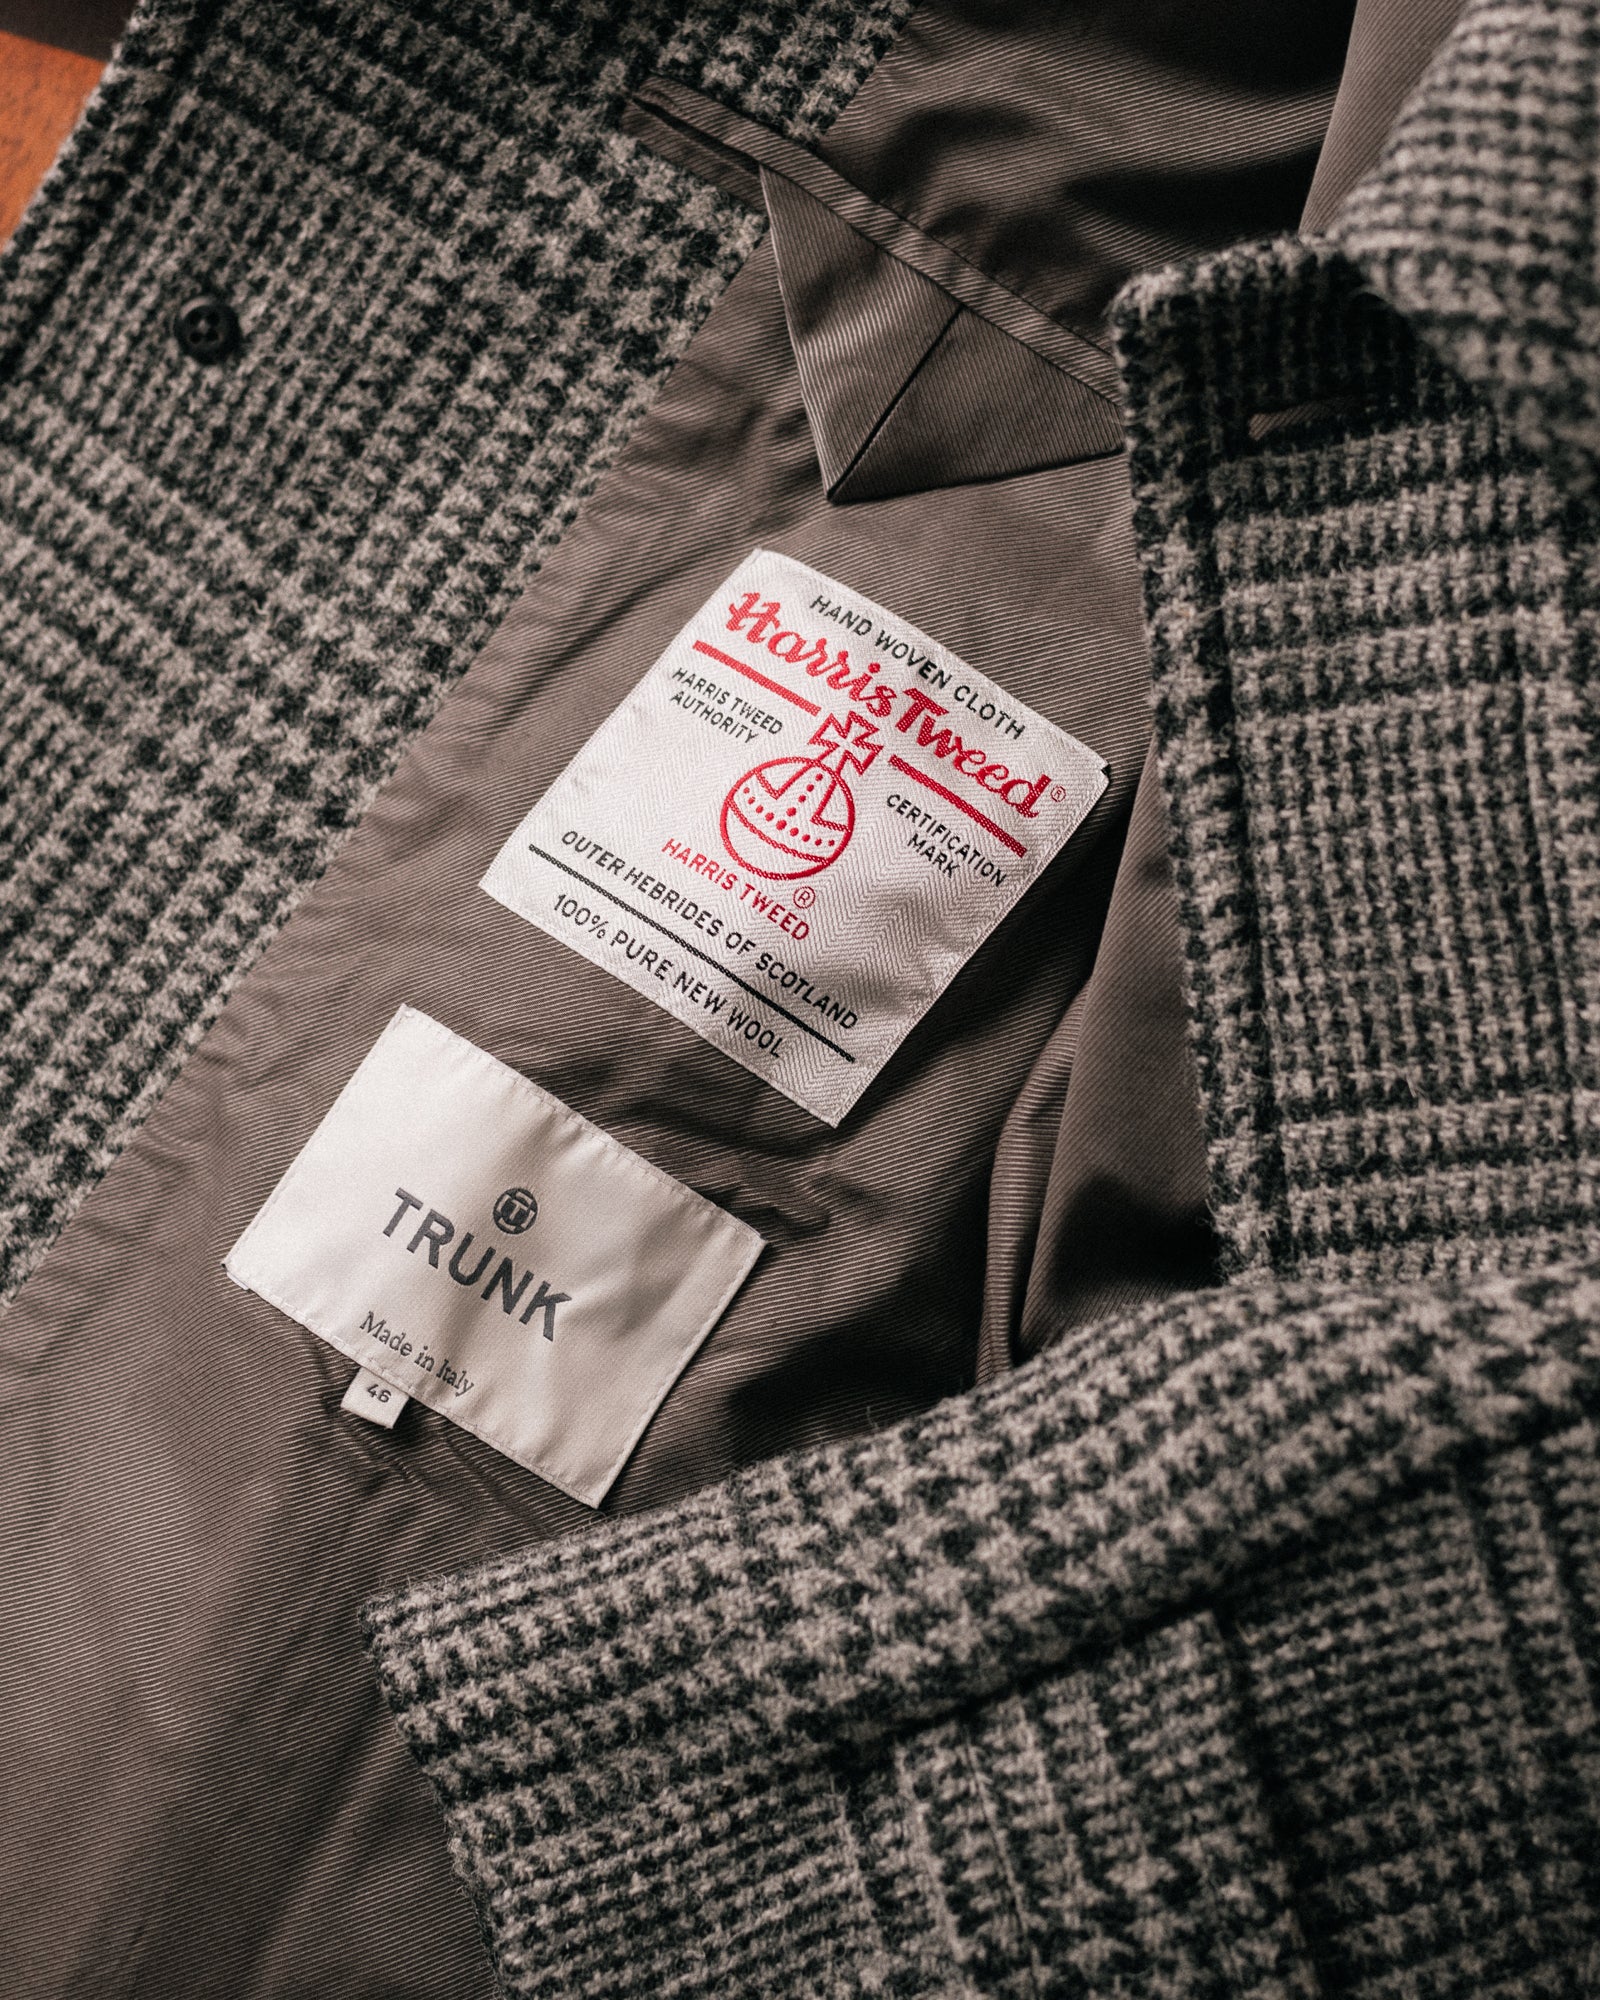 Exploring Harris Tweed and Abraham Moon - A Textile Journey